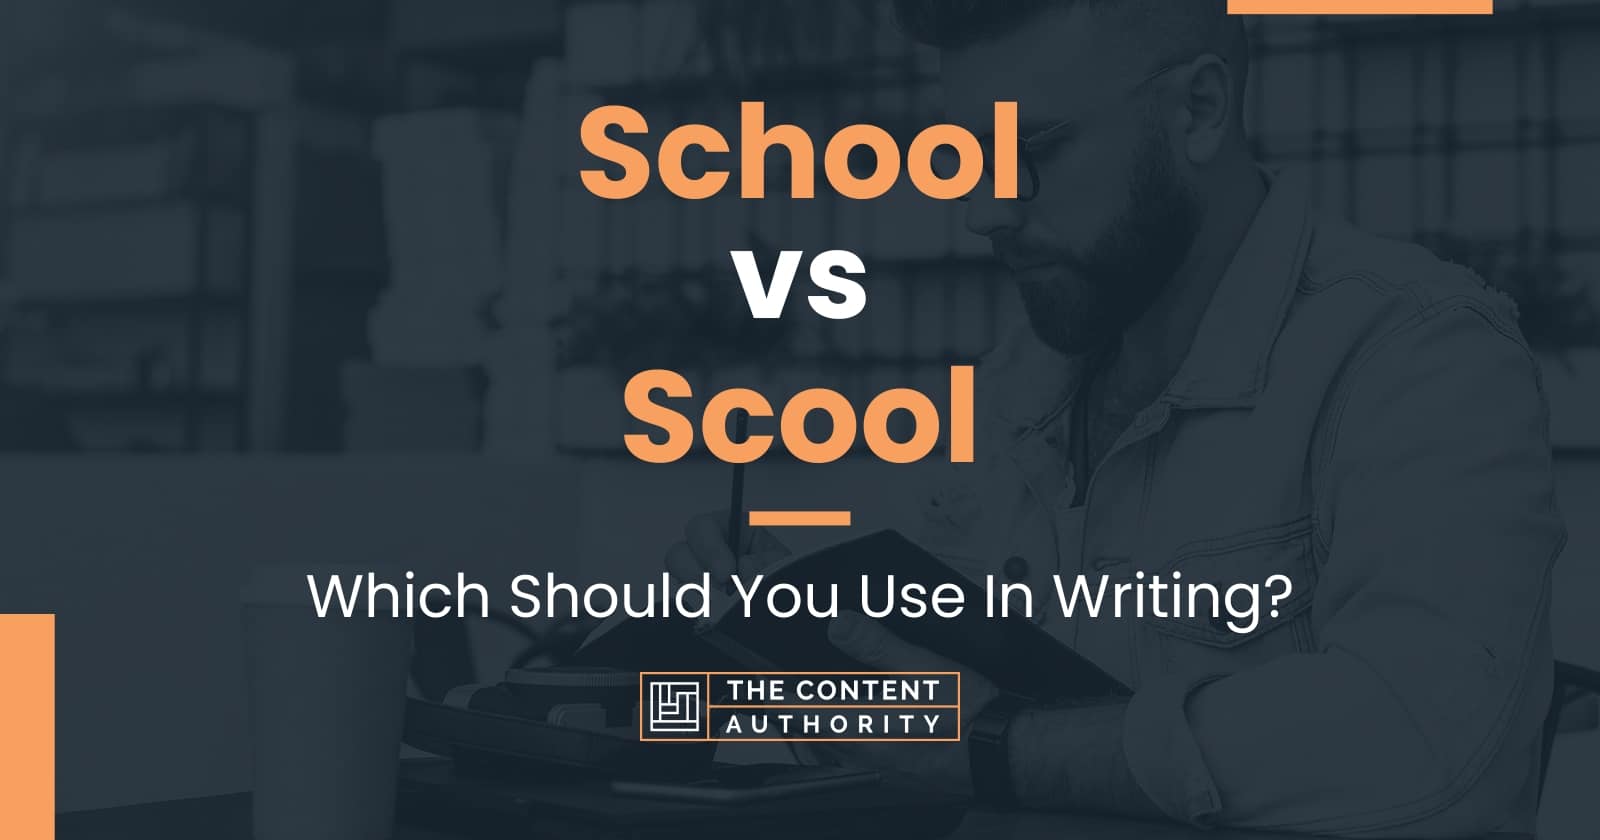 School vs Scool: Which Should You Use In Writing?